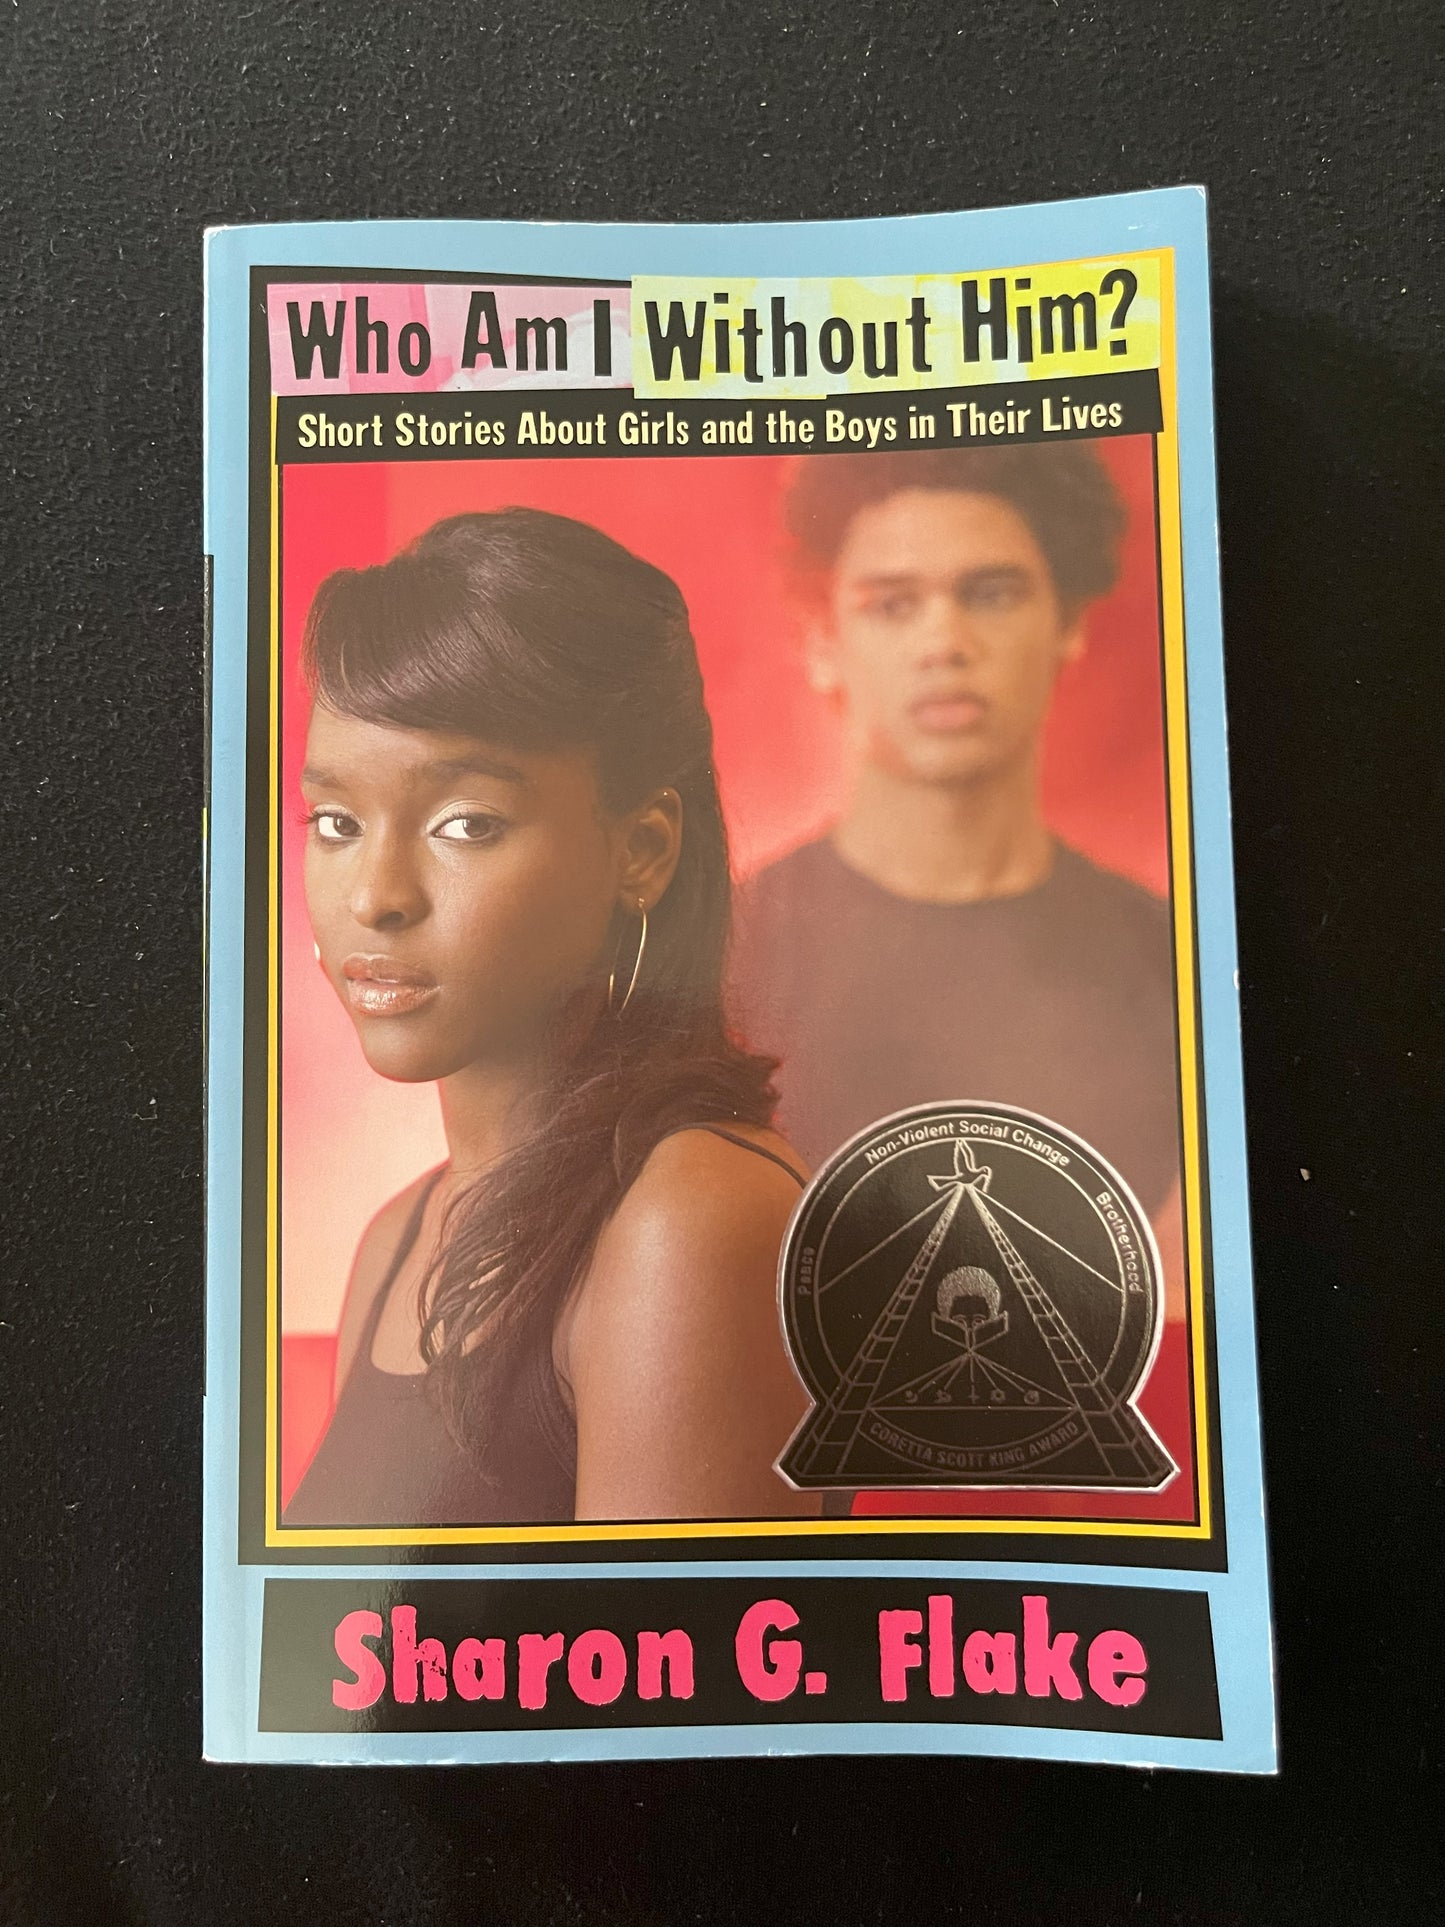 WHO AM I WITHOUT HIM? by Sharon G. Flake